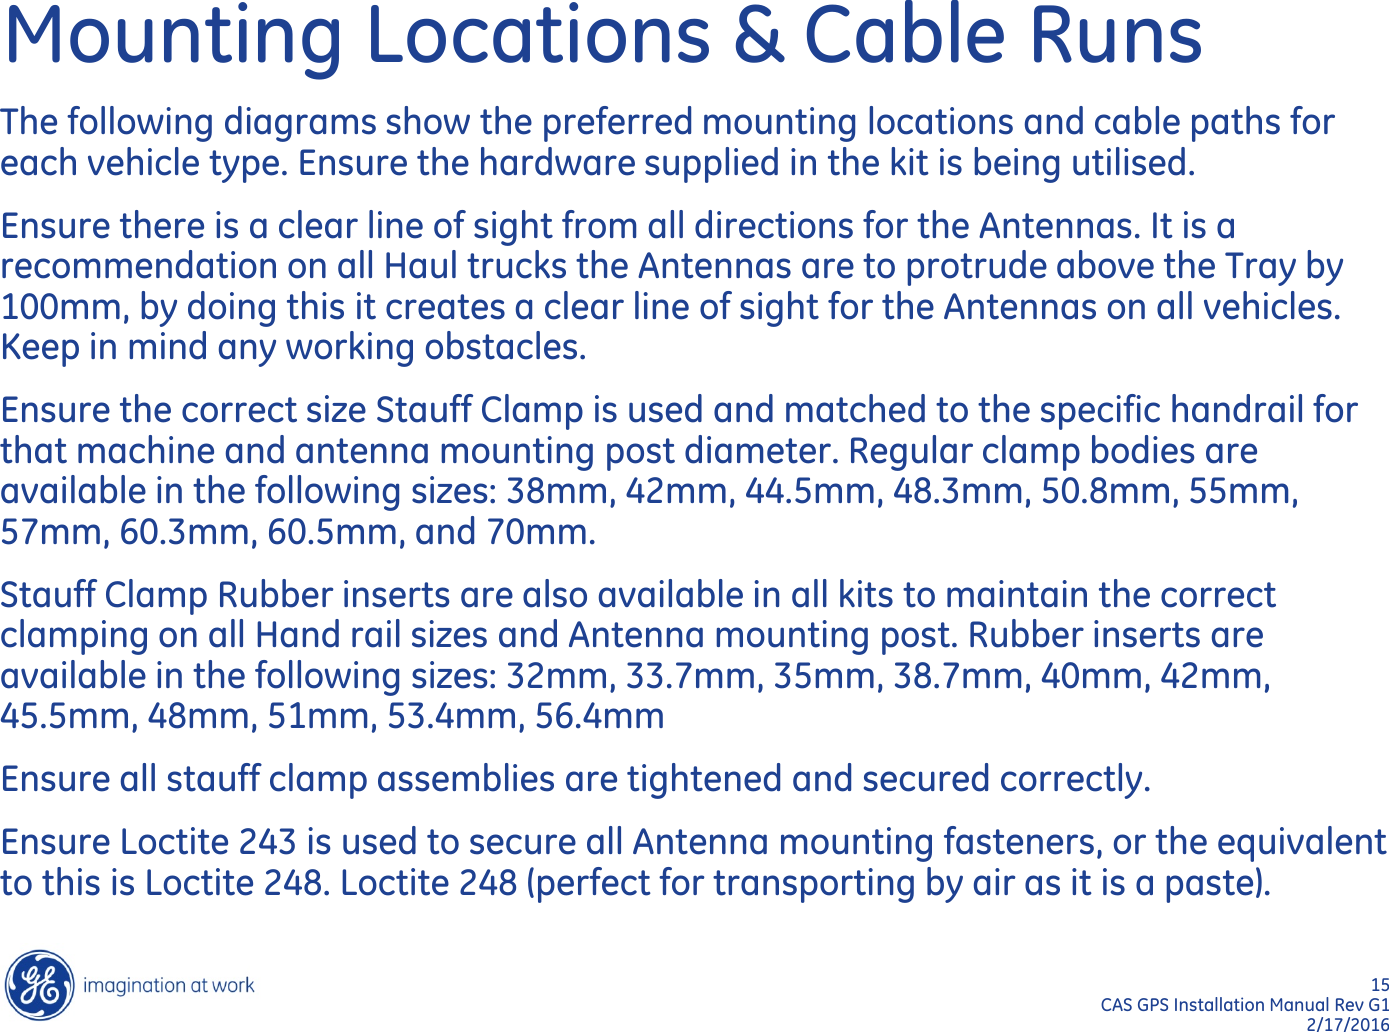 15  CAS GPS Installation Manual Rev G1 2/17/2016 Mounting Locations &amp; Cable Runs The following diagrams show the preferred mounting locations and cable paths for each vehicle type. Ensure the hardware supplied in the kit is being utilised.  Ensure there is a clear line of sight from all directions for the Antennas. It is a recommendation on all Haul trucks the Antennas are to protrude above the Tray by 100mm, by doing this it creates a clear line of sight for the Antennas on all vehicles. Keep in mind any working obstacles. Ensure the correct size Stauff Clamp is used and matched to the specific handrail for that machine and antenna mounting post diameter. Regular clamp bodies are available in the following sizes: 38mm, 42mm, 44.5mm, 48.3mm, 50.8mm, 55mm, 57mm, 60.3mm, 60.5mm, and 70mm. Stauff Clamp Rubber inserts are also available in all kits to maintain the correct clamping on all Hand rail sizes and Antenna mounting post. Rubber inserts are available in the following sizes: 32mm, 33.7mm, 35mm, 38.7mm, 40mm, 42mm, 45.5mm, 48mm, 51mm, 53.4mm, 56.4mm Ensure all stauff clamp assemblies are tightened and secured correctly. Ensure Loctite 243 is used to secure all Antenna mounting fasteners, or the equivalent to this is Loctite 248. Loctite 248 (perfect for transporting by air as it is a paste). 